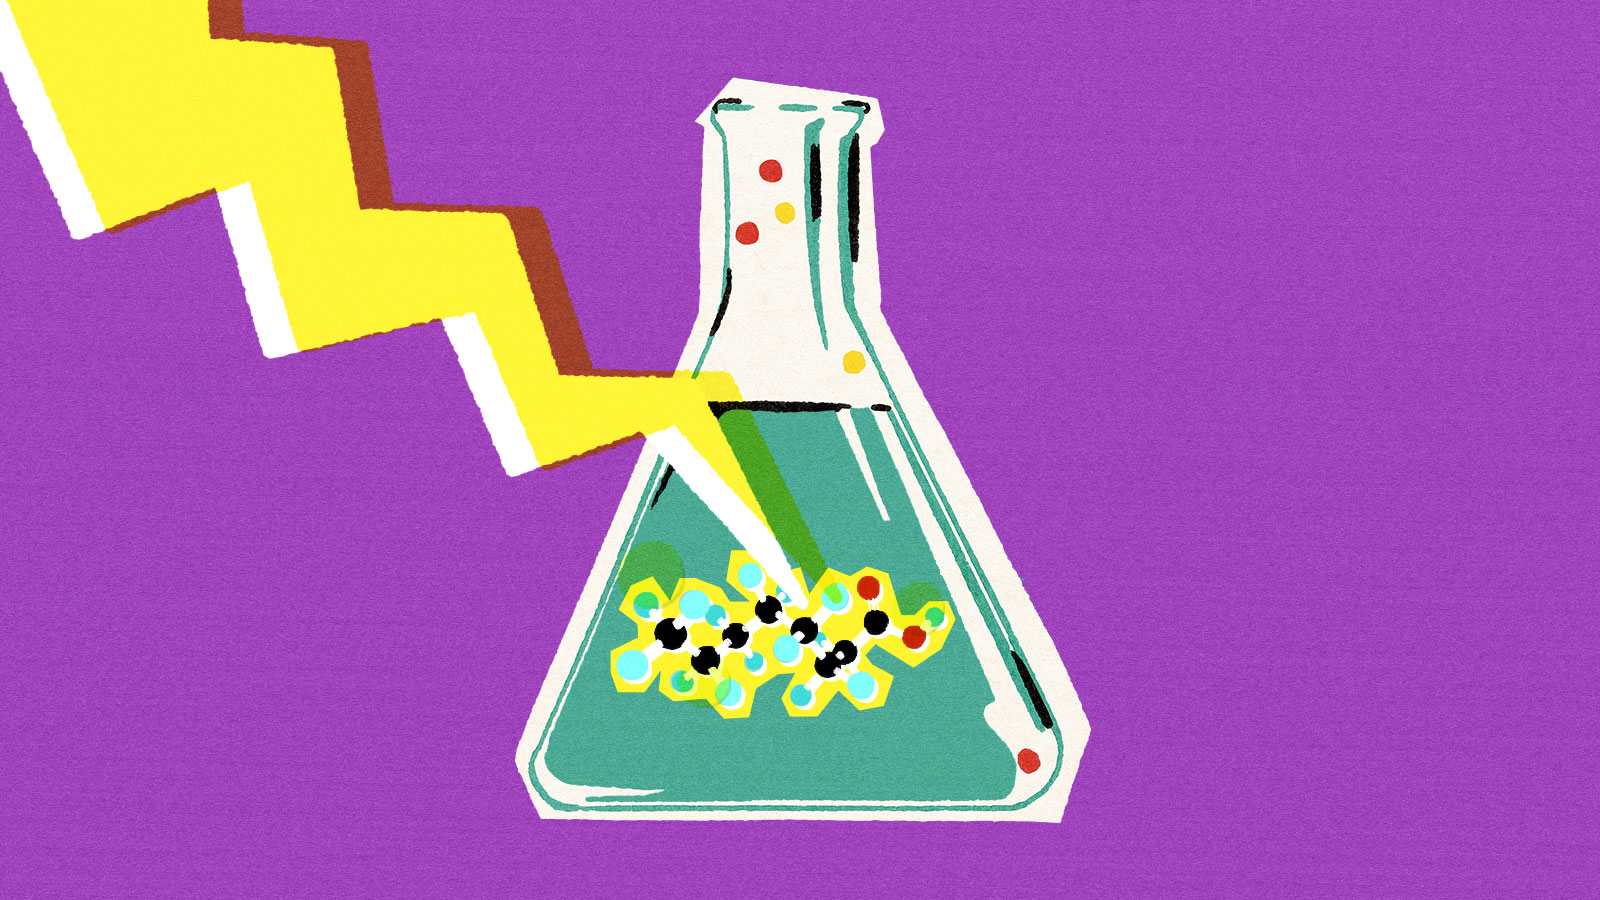 An illustration of a beaker with a molecule representing PFAs being struck by lightning